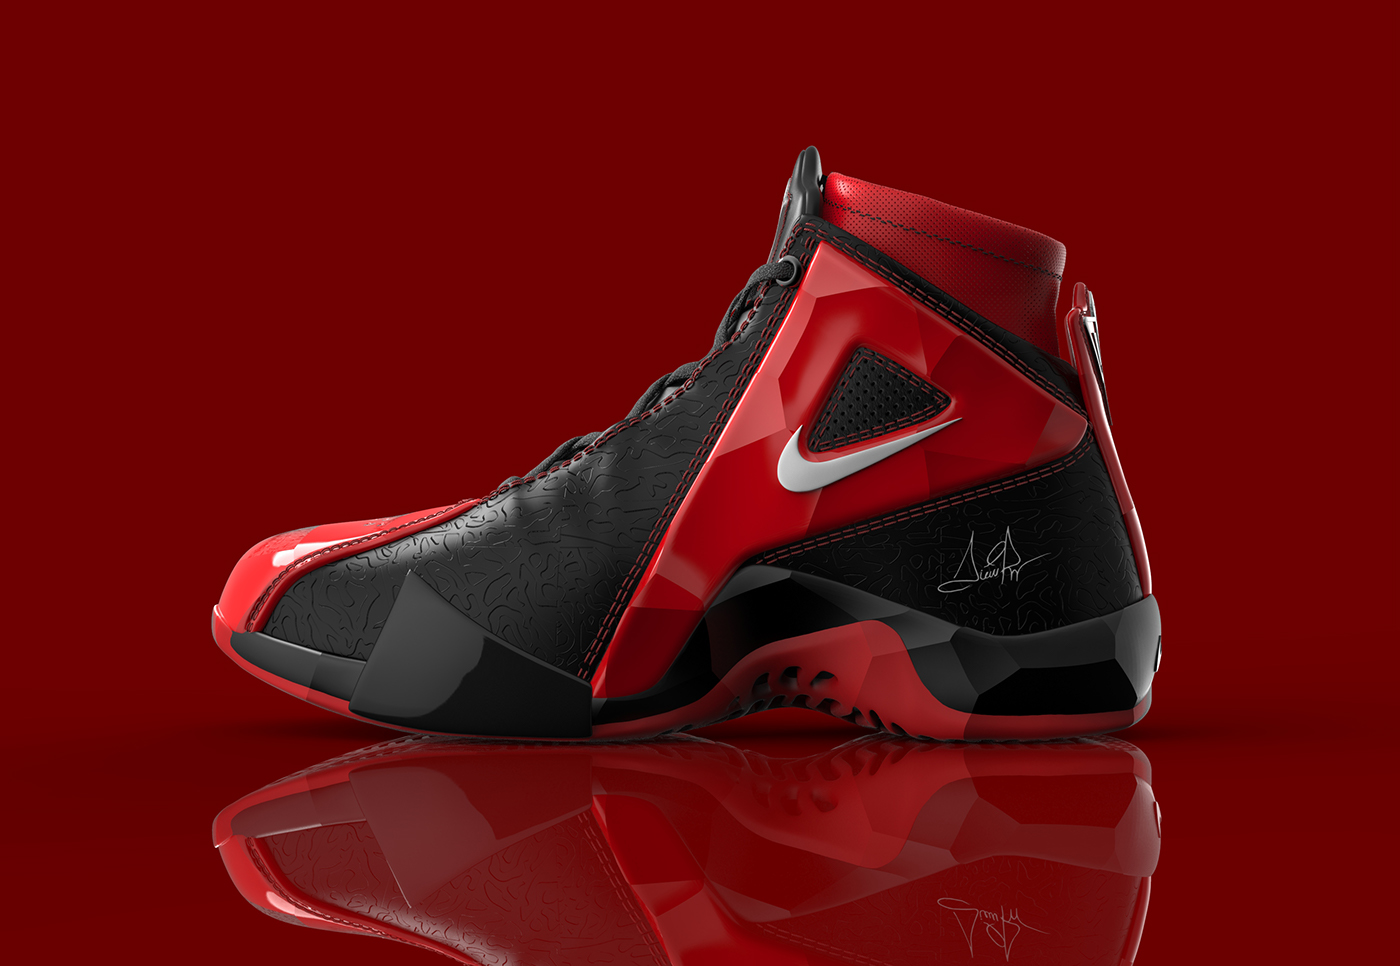 pippen basketball shoes